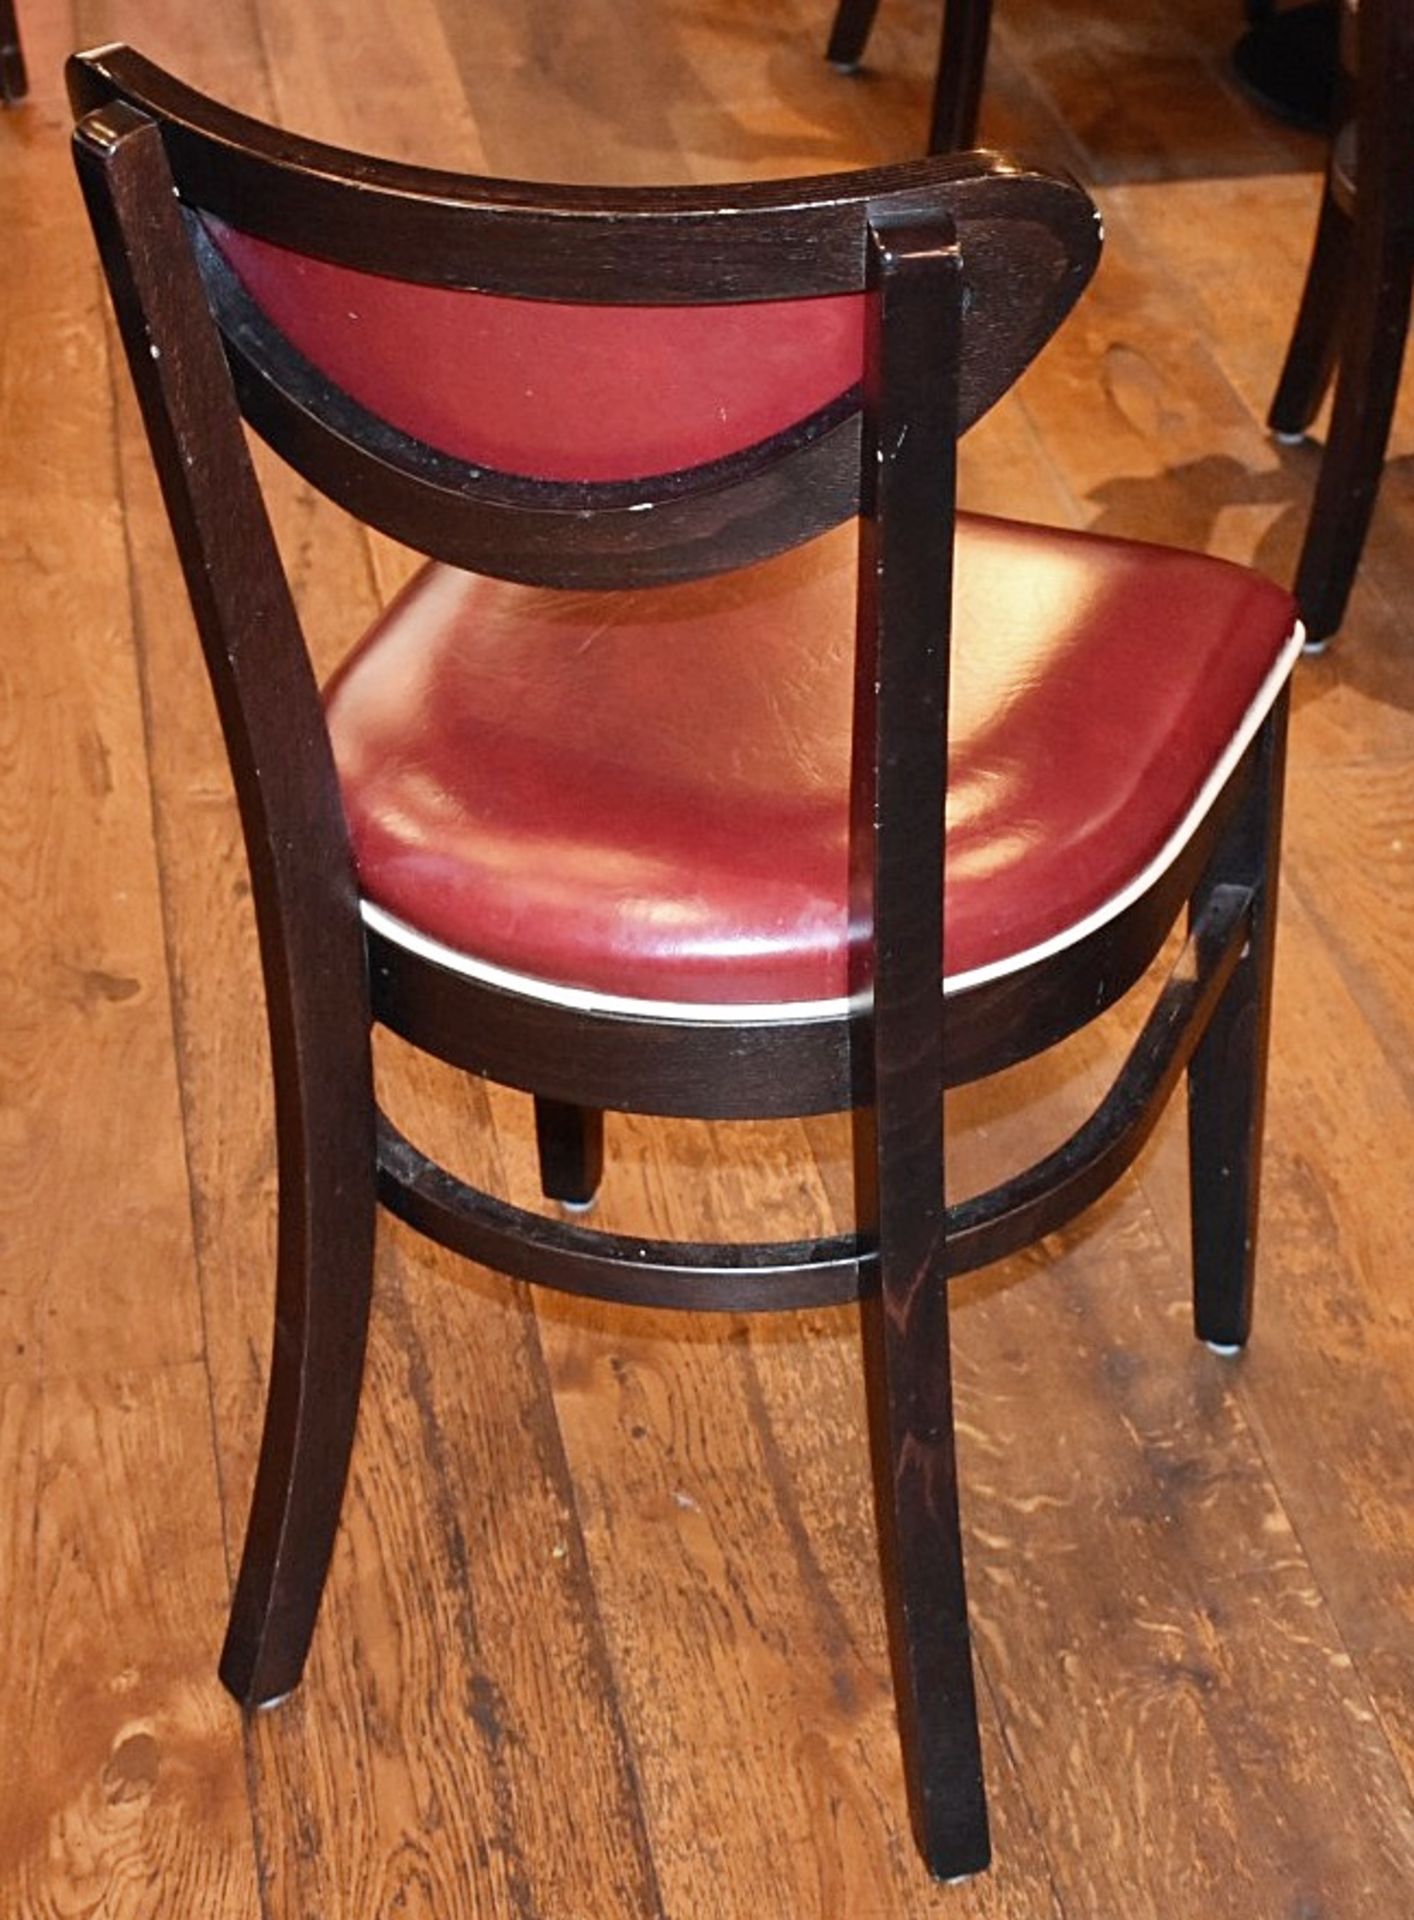 8 x Wine Red Faux Leather Dining Chairs From Italian American Restaurant - Retro Design With Dark - Image 2 of 4